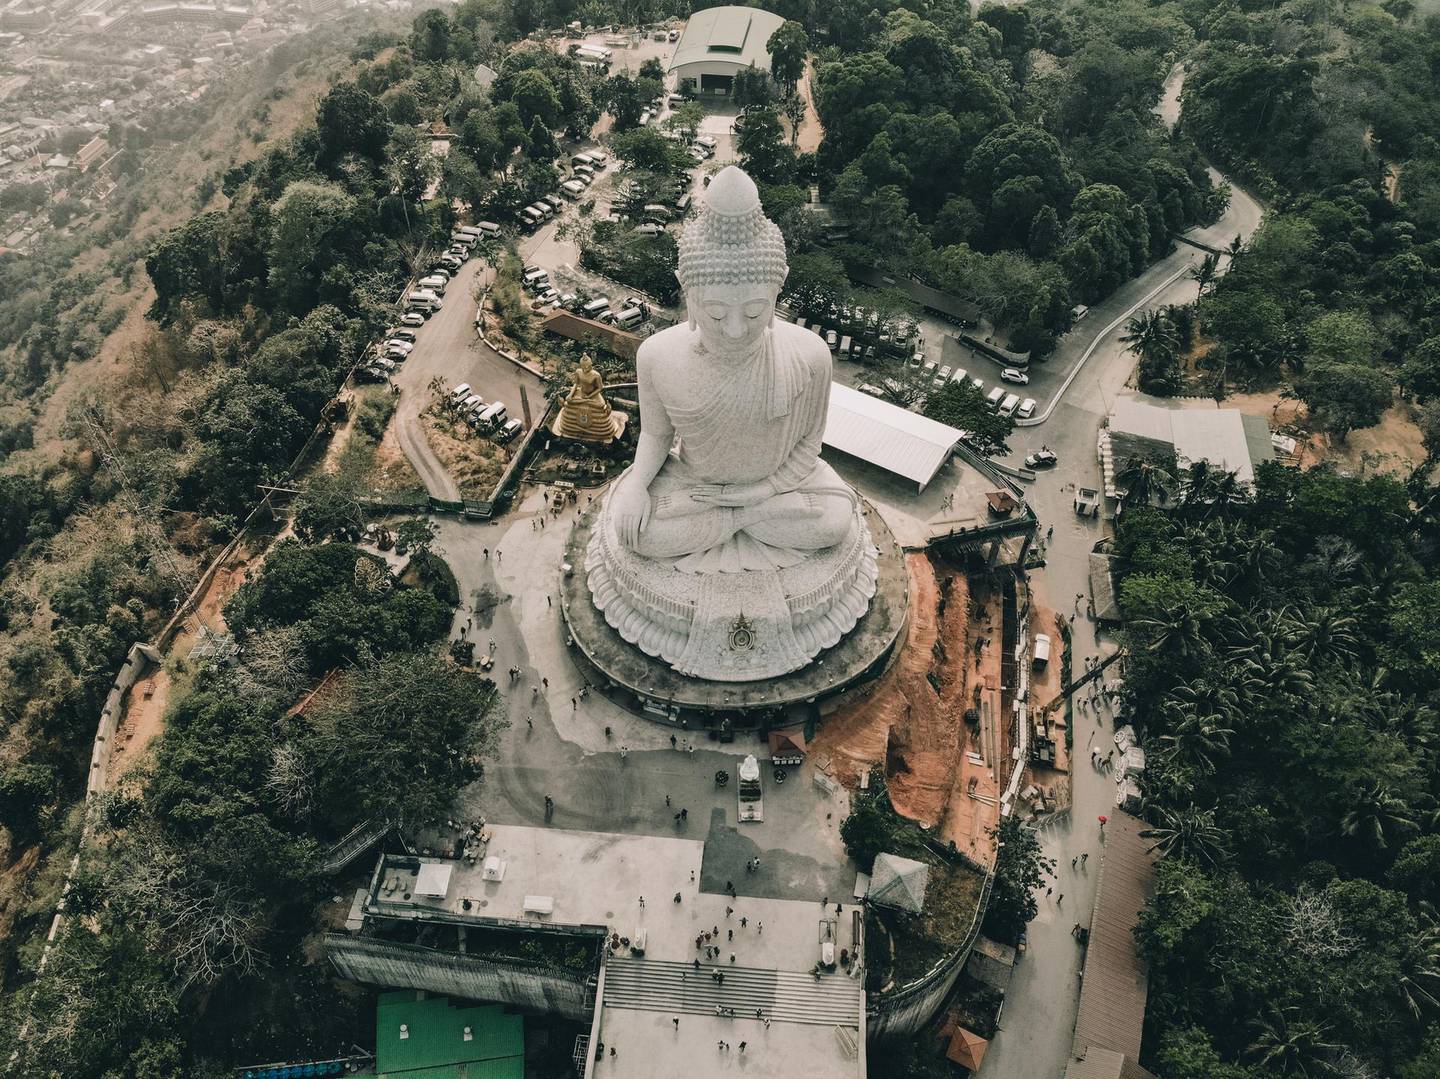 The Great Buddha of Phuket is one of the island's most-visited attractions. Miltiadis Fragkidis / Unsplash